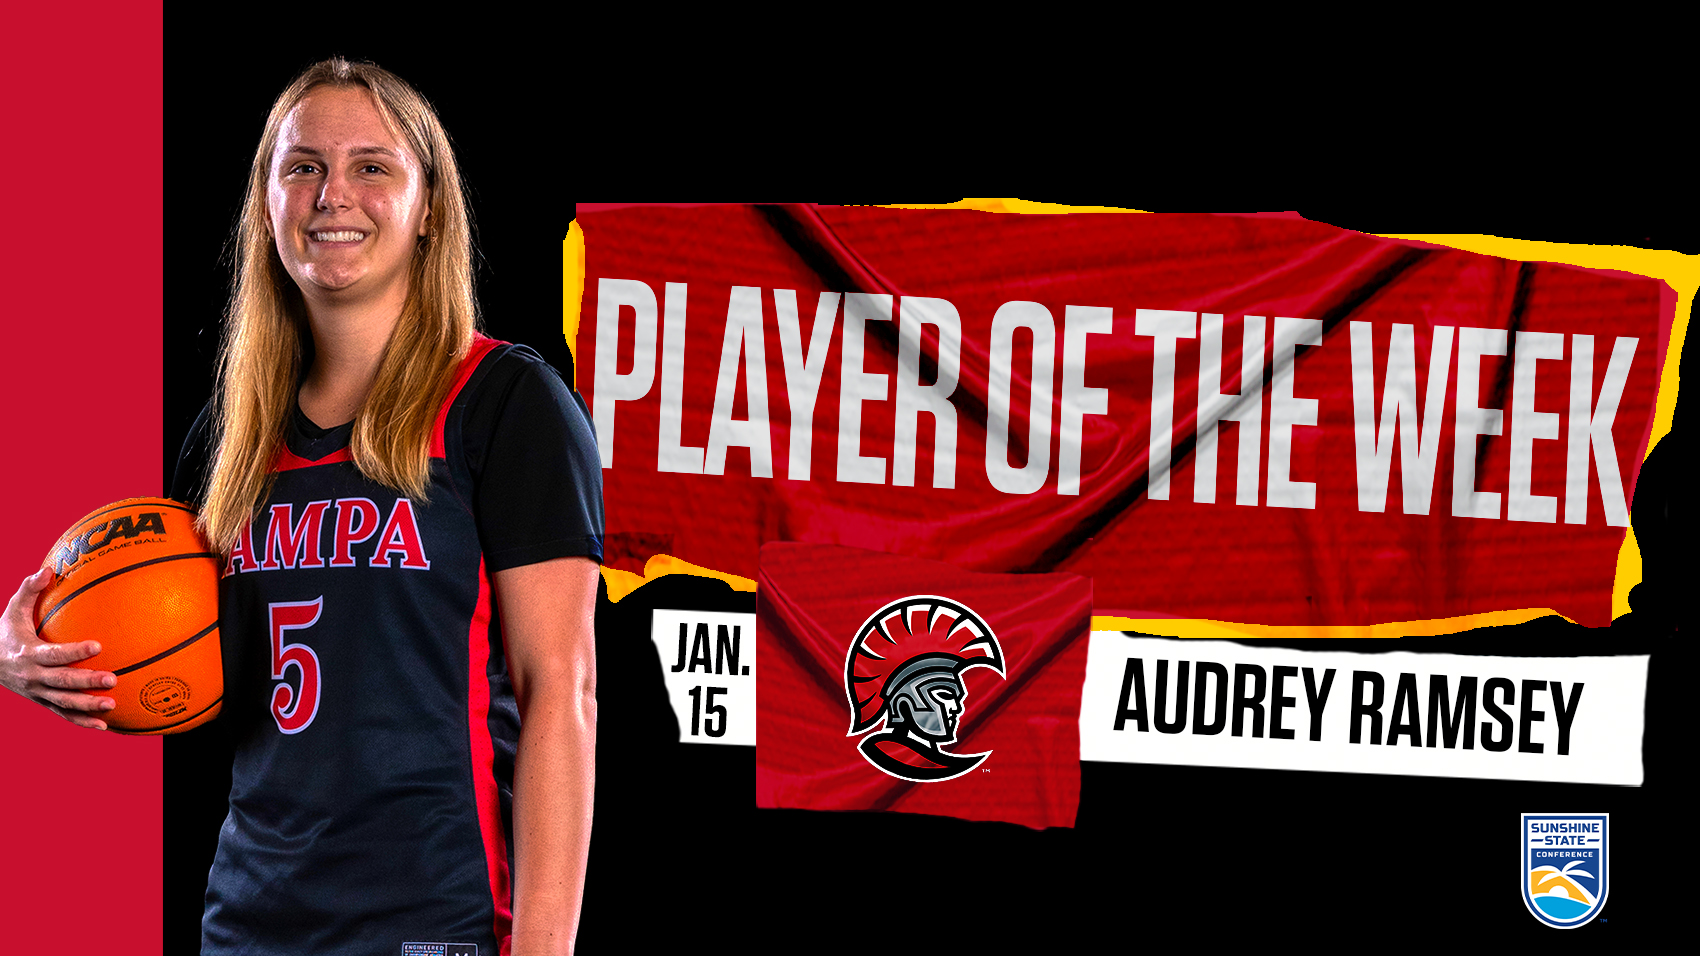 SSC Player of the Week Audrey Ramsey